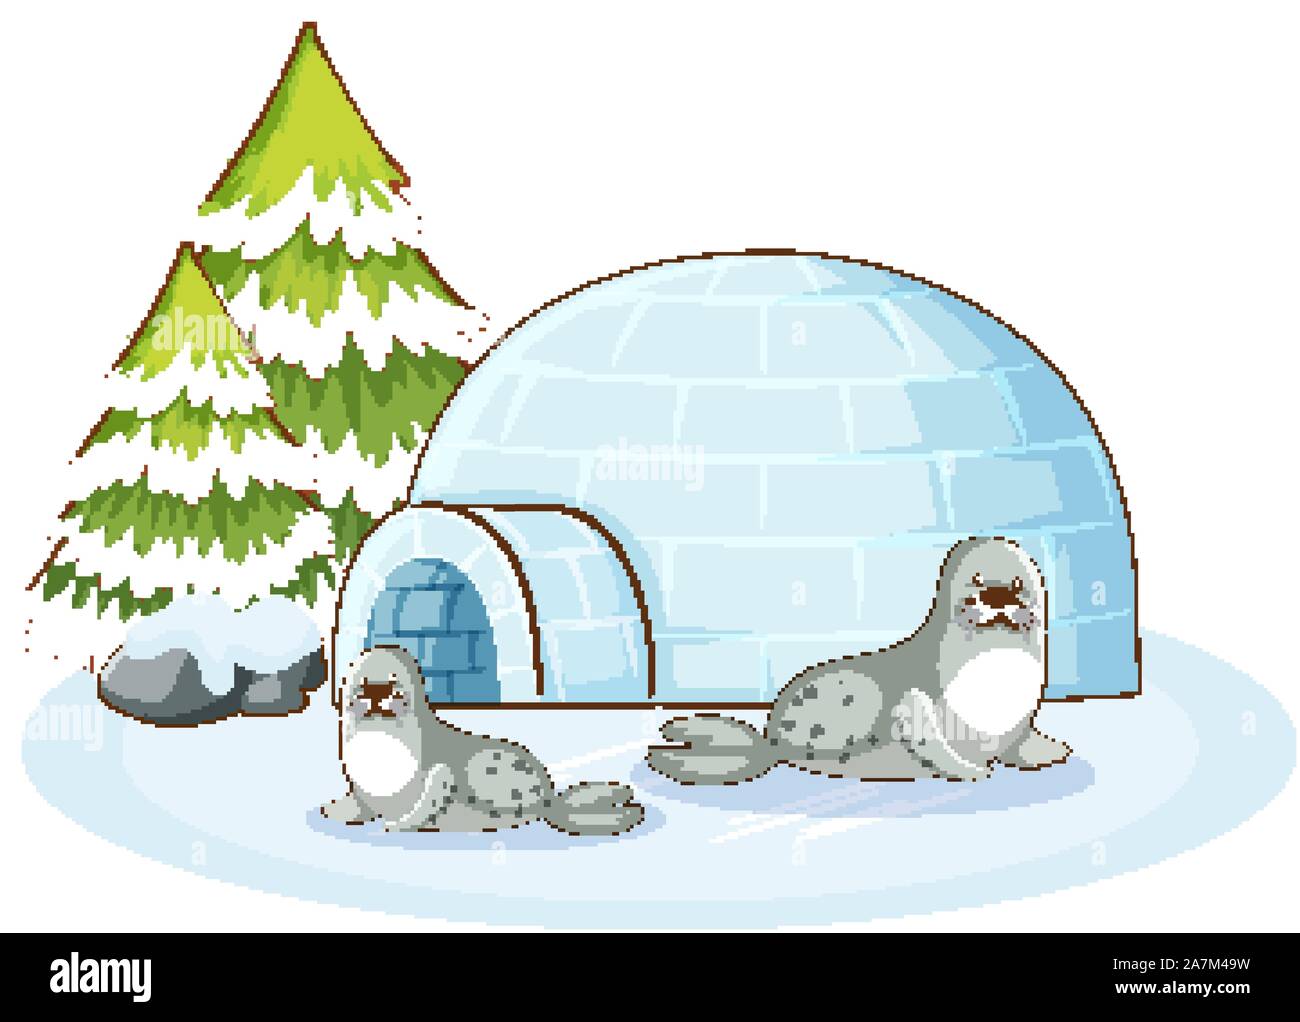 Seals and igloo in winter illustration Stock Vector